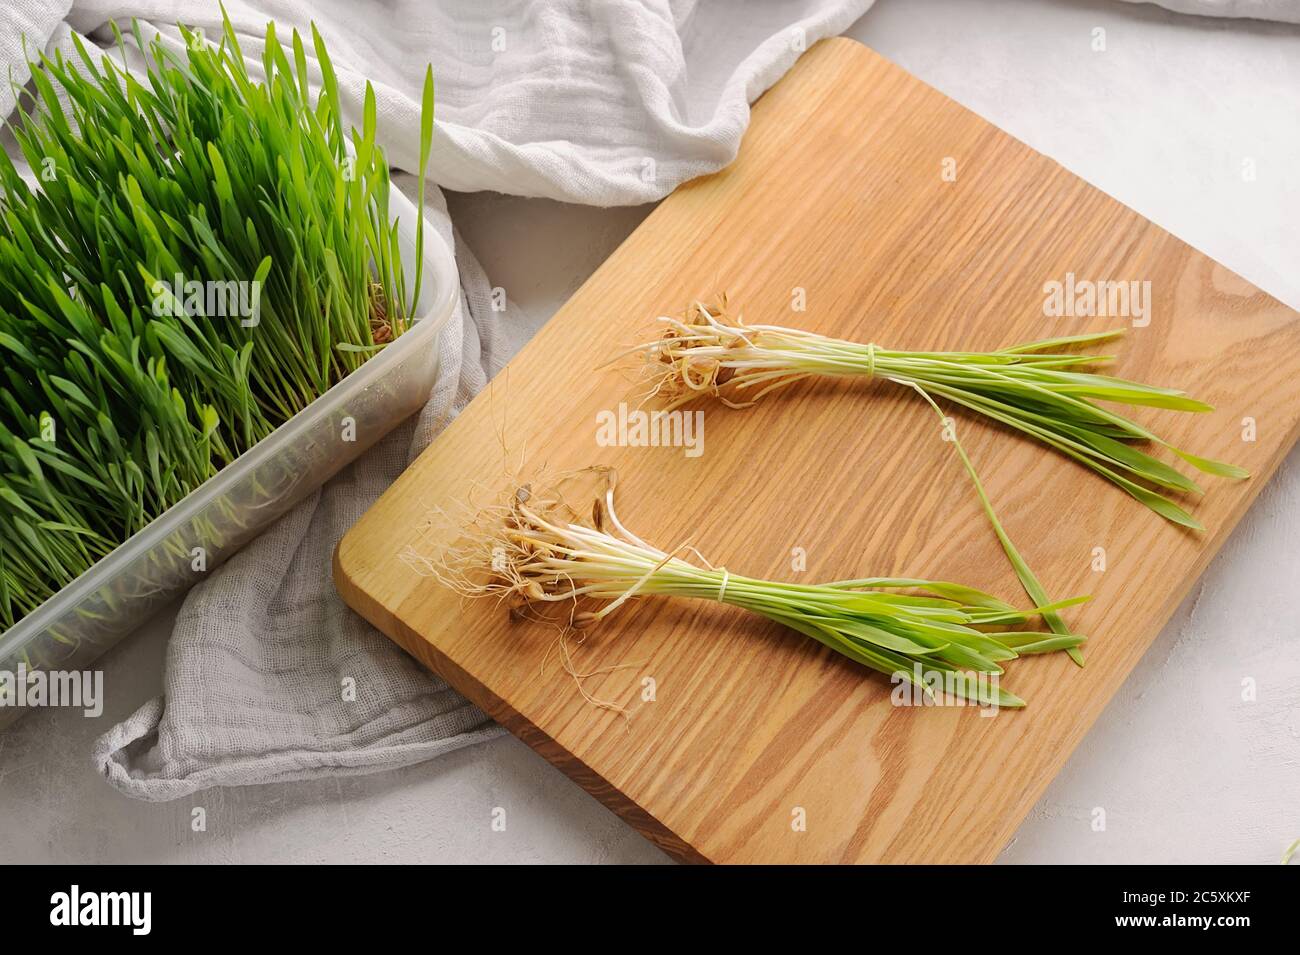 Green wheat grass plant on the cutting board and in the pot.Sprouted wheat. Healthy, detox ingredient. Stock Photo